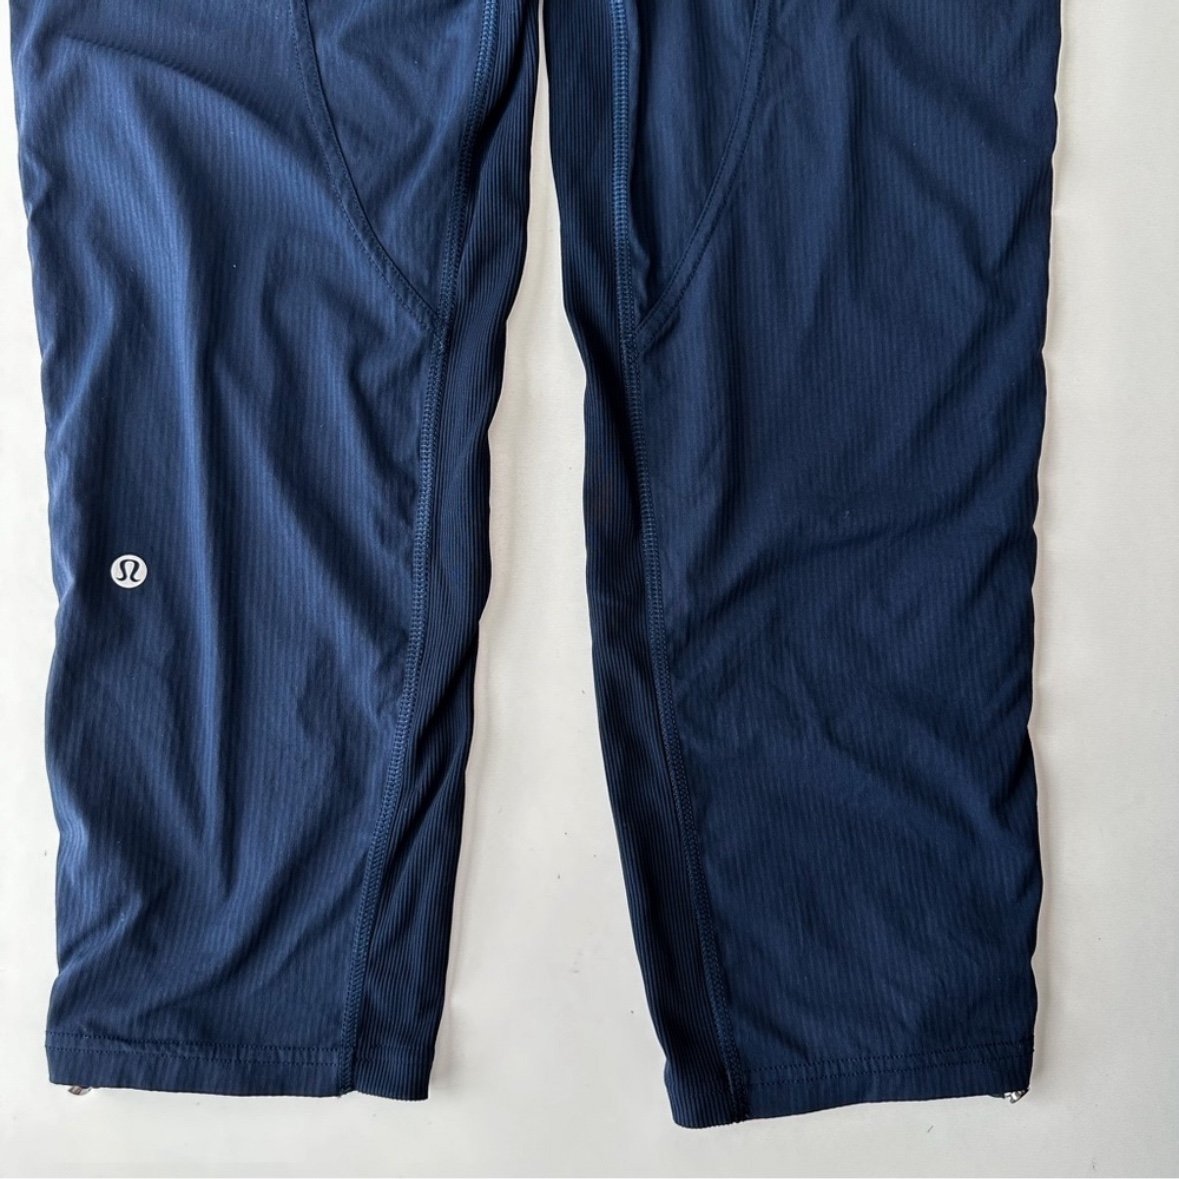 Discounted Lululemon Women’s Dance Studio Crop 25” Navy Size 4 IBt93n4Iw Outlet Store